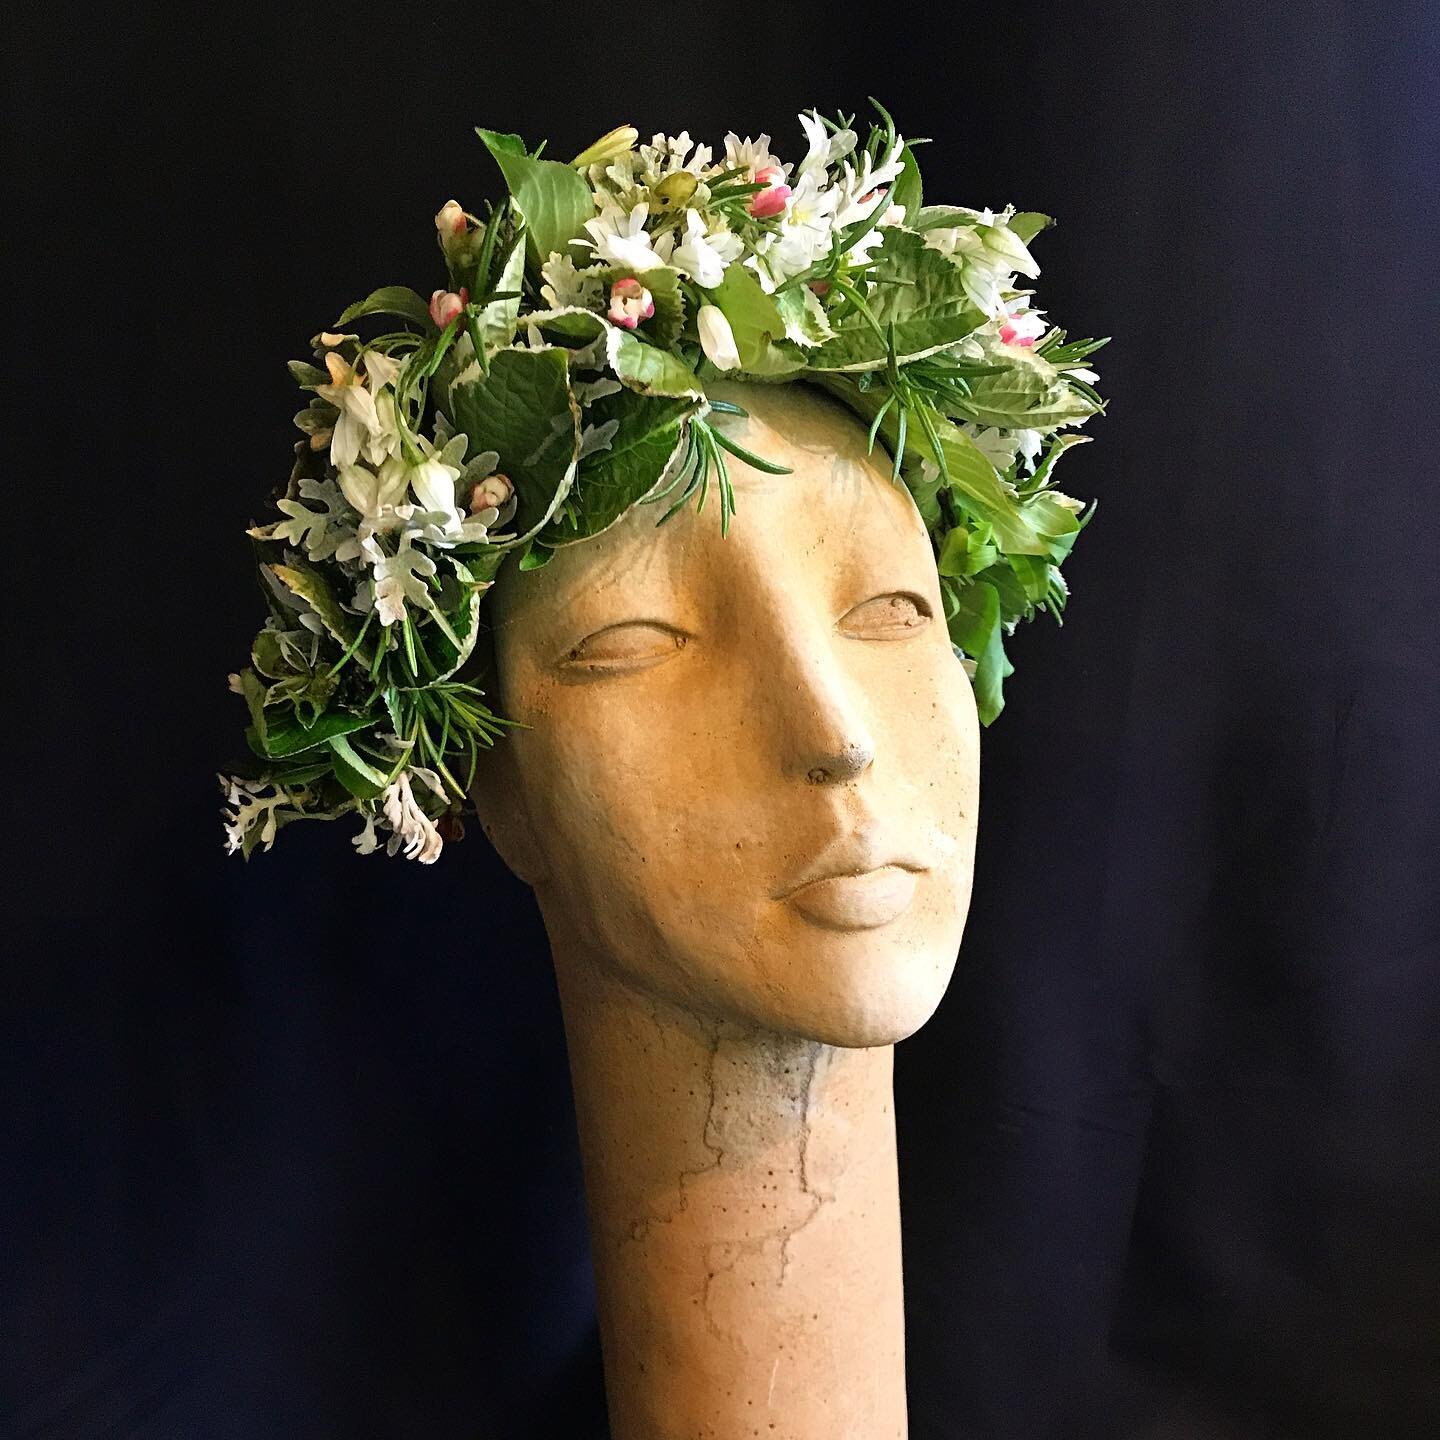 Coming into the Labor Day weekend I wish for everyone to carve out some time for self, family, beauty, and play!! 
This flower crown of gathered greens took no time to create.  Gather your loved ones and make flower crowns just for fun . Remember mak